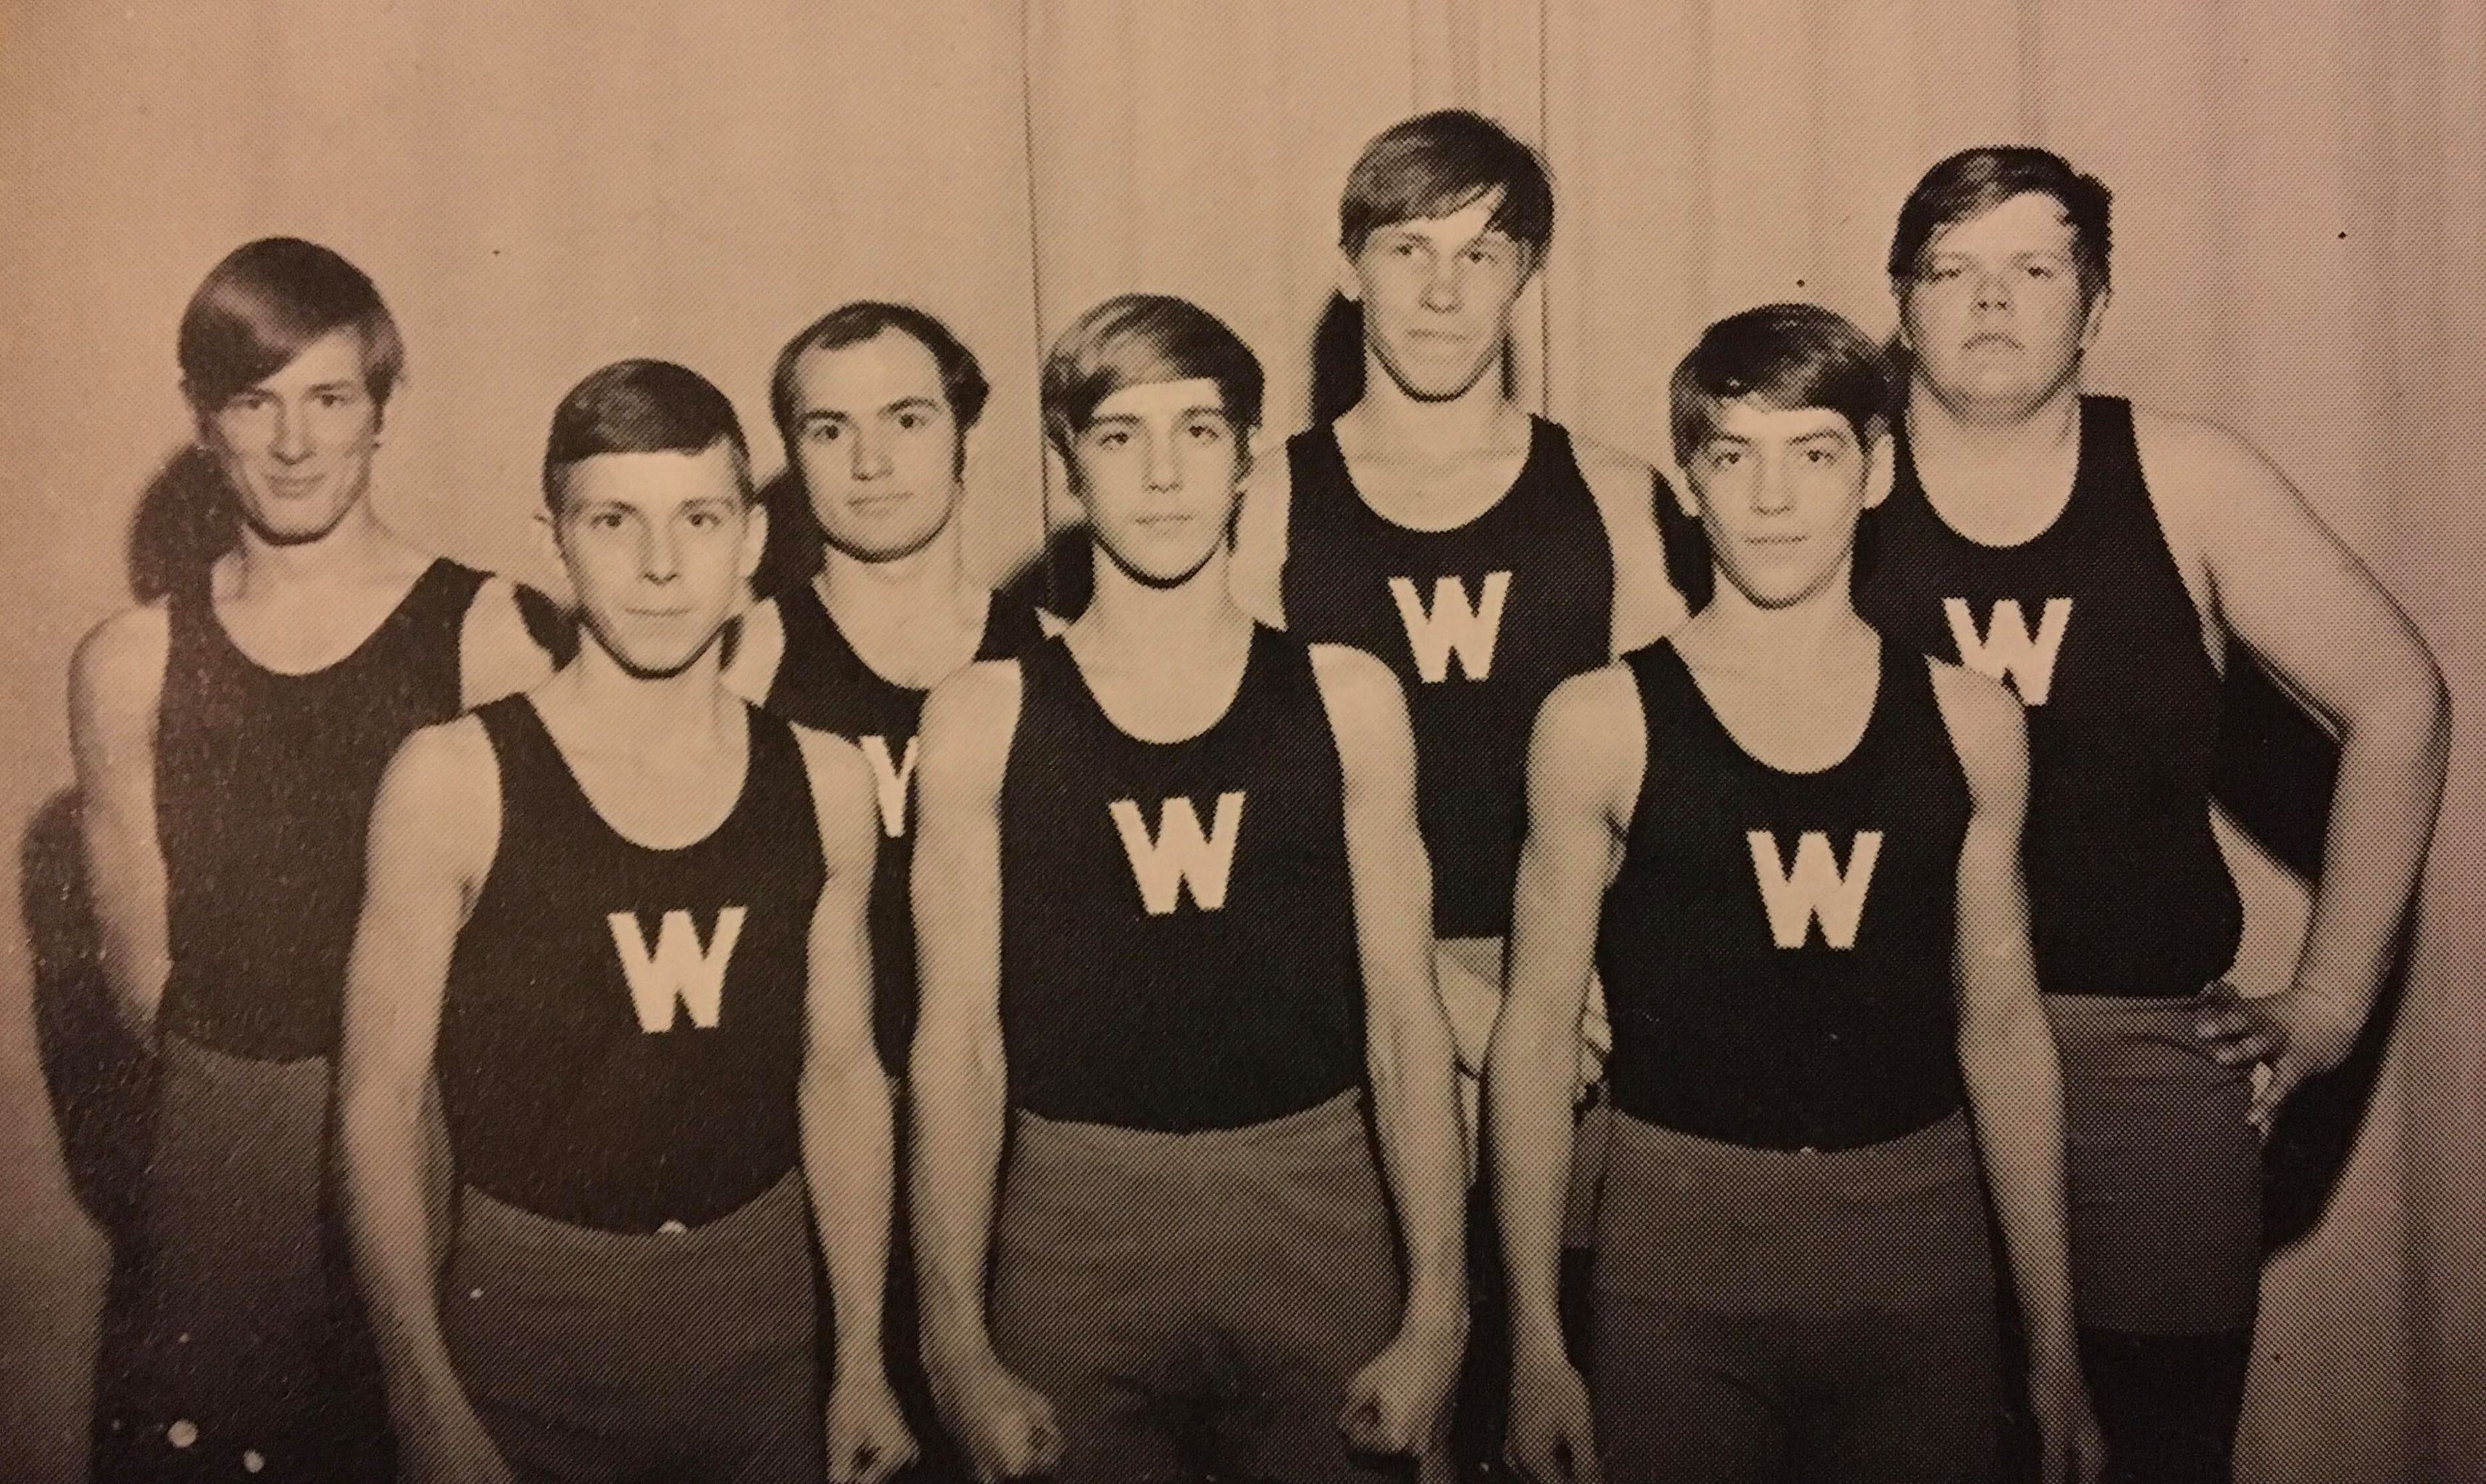 The Hammers of 1970-1971: Left to Right: Alyn Knudtson, Brian Borreson, Bob Shanklin, Brian Knutson, Dave Jarstad, Ralph Lyon, and Bob Speerstra.